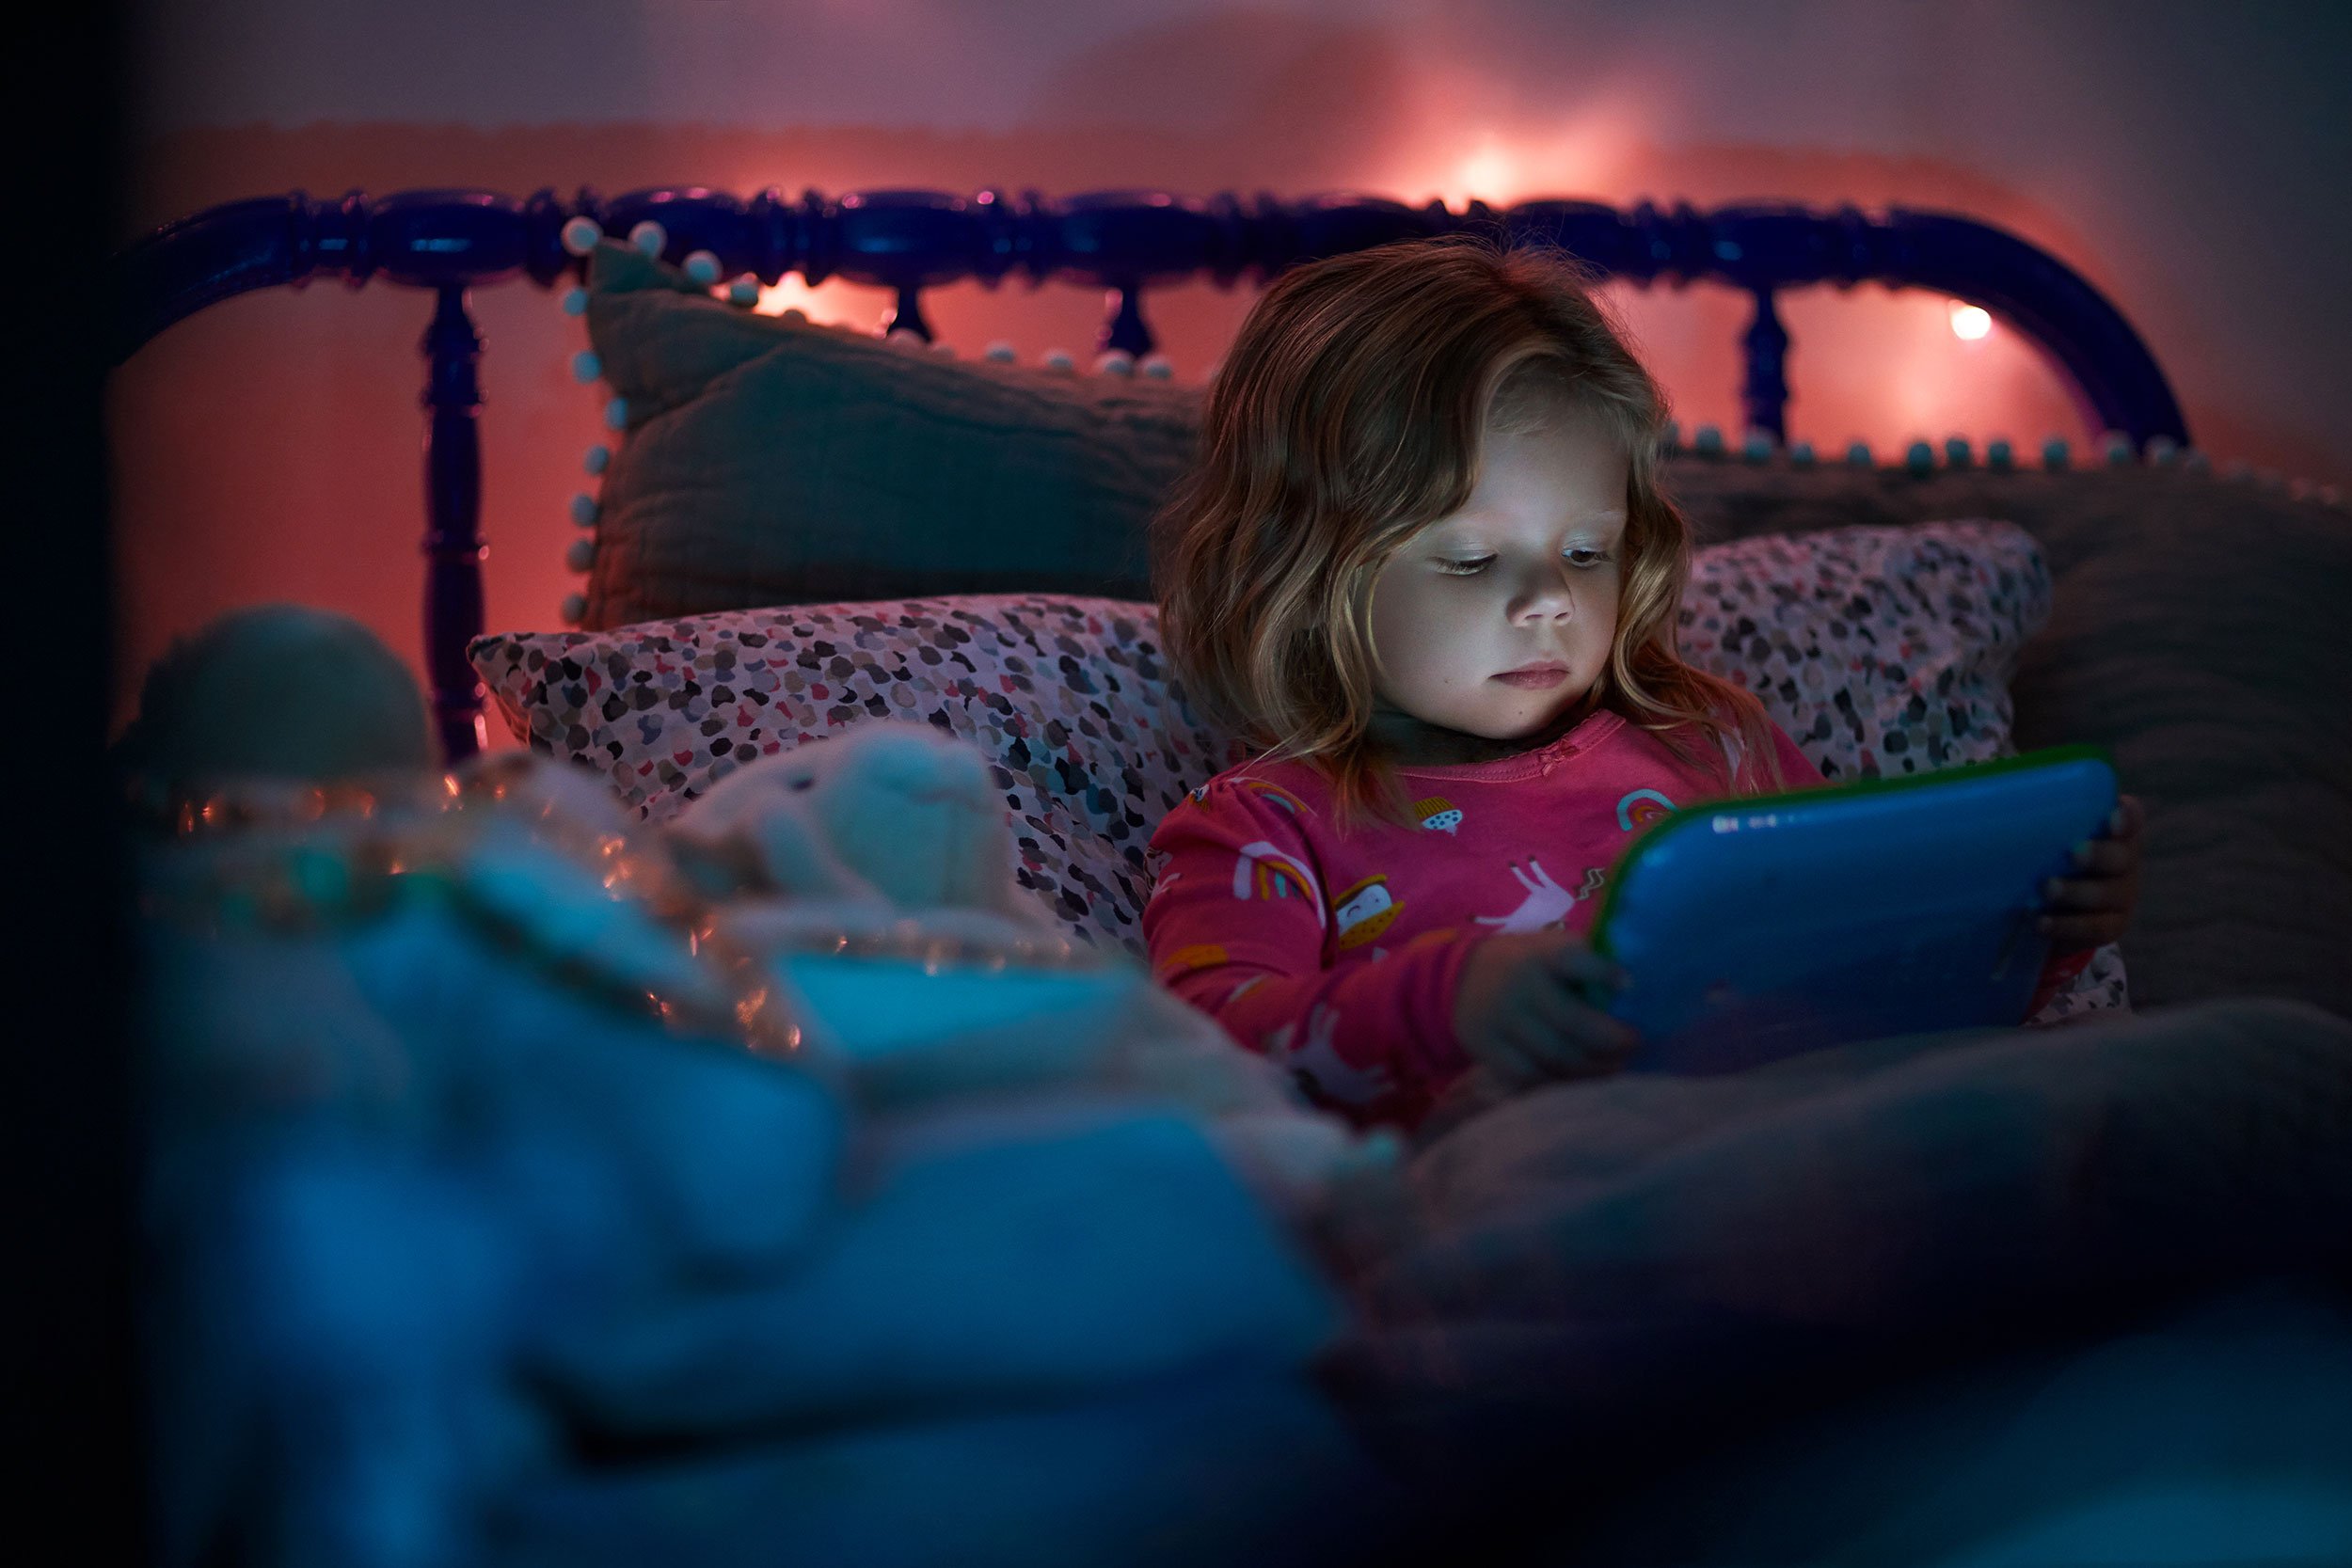 Natalia Weedy Calix a young White child in bed at night using a device rather than sleeping